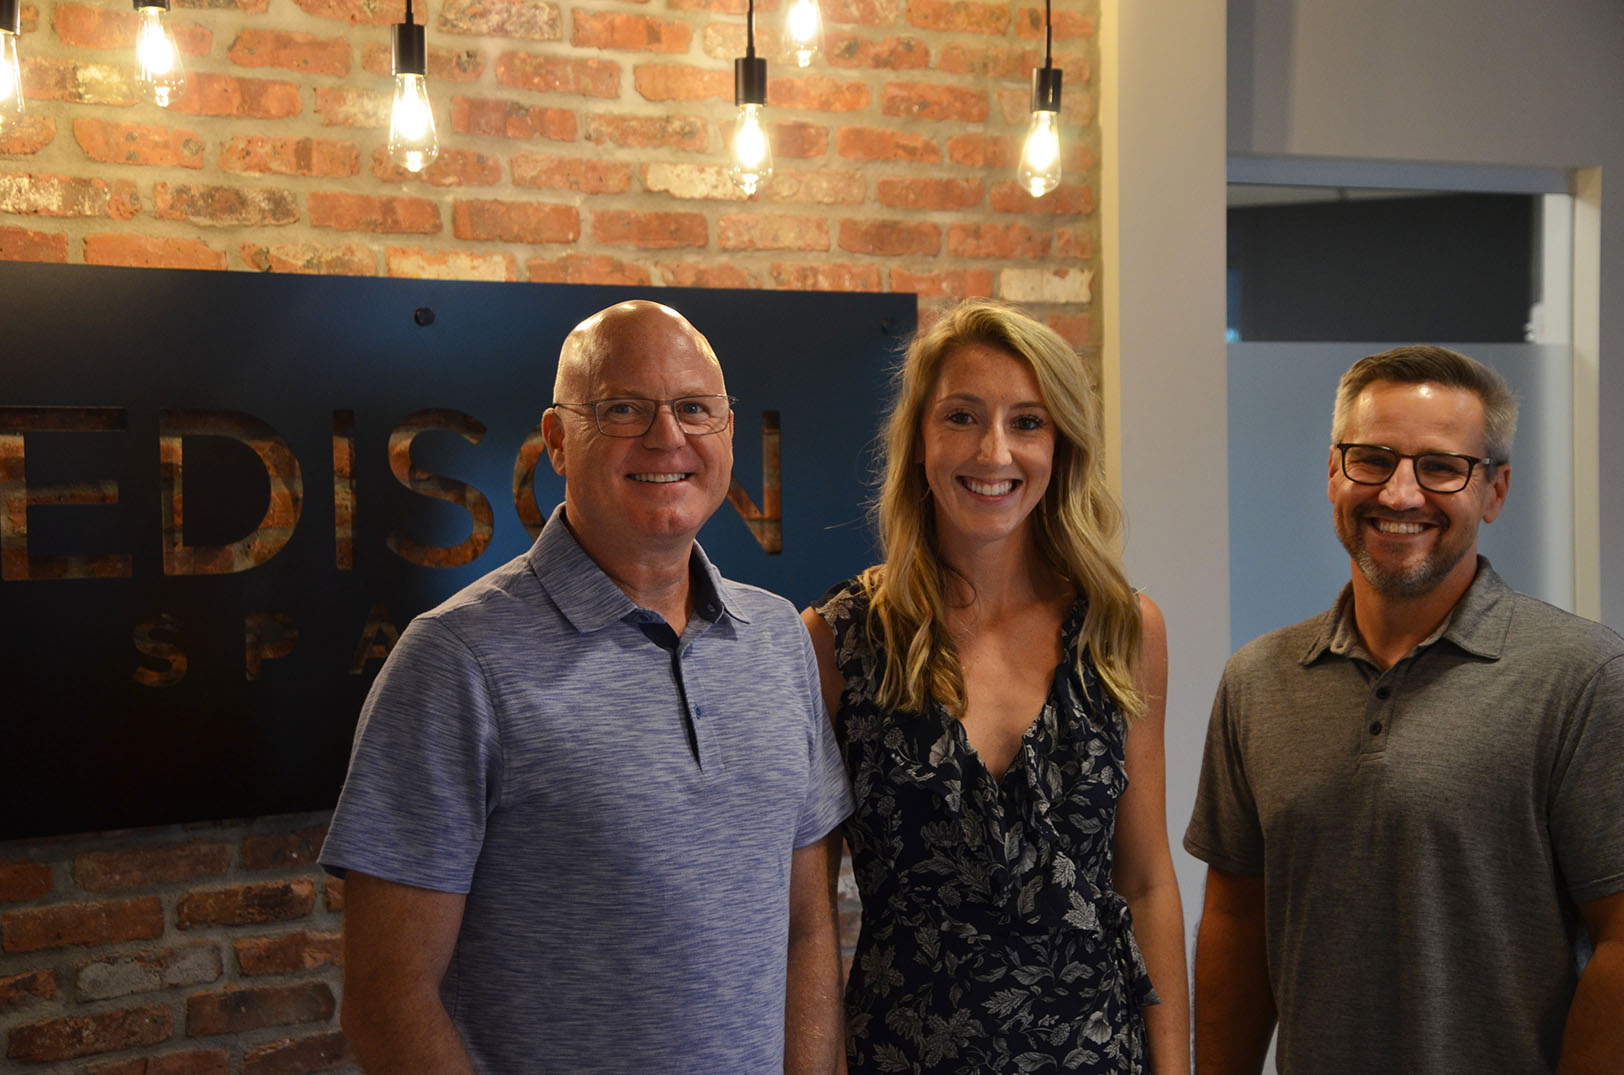 Second Edison Spaces flexible office site designed for uncertainty of startup life